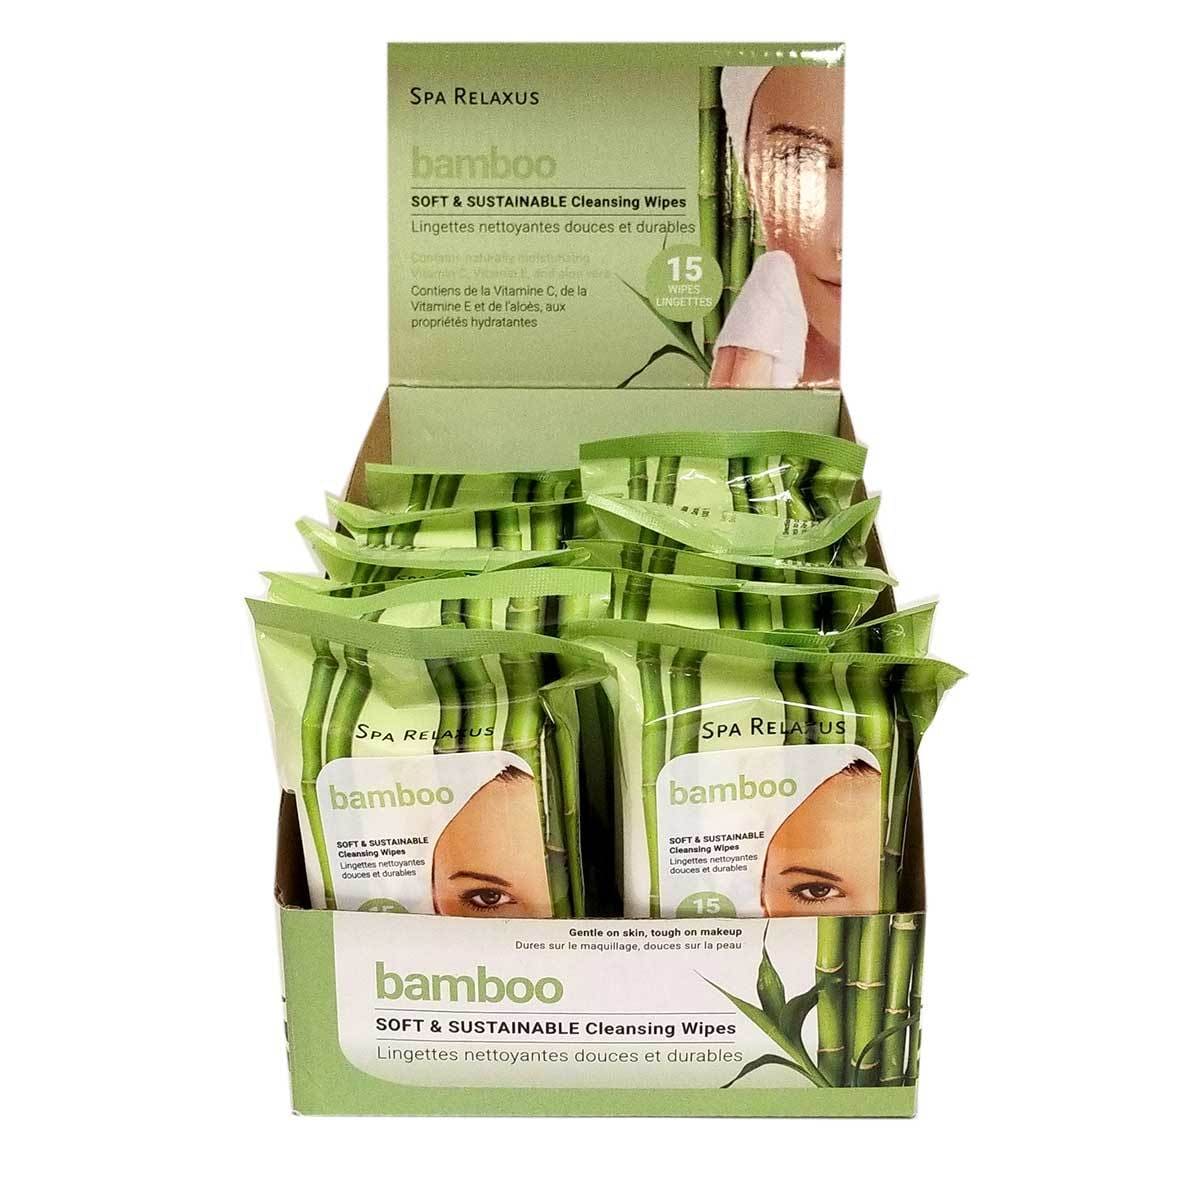 Bamboo Cleansing Wipes Displayer of 12